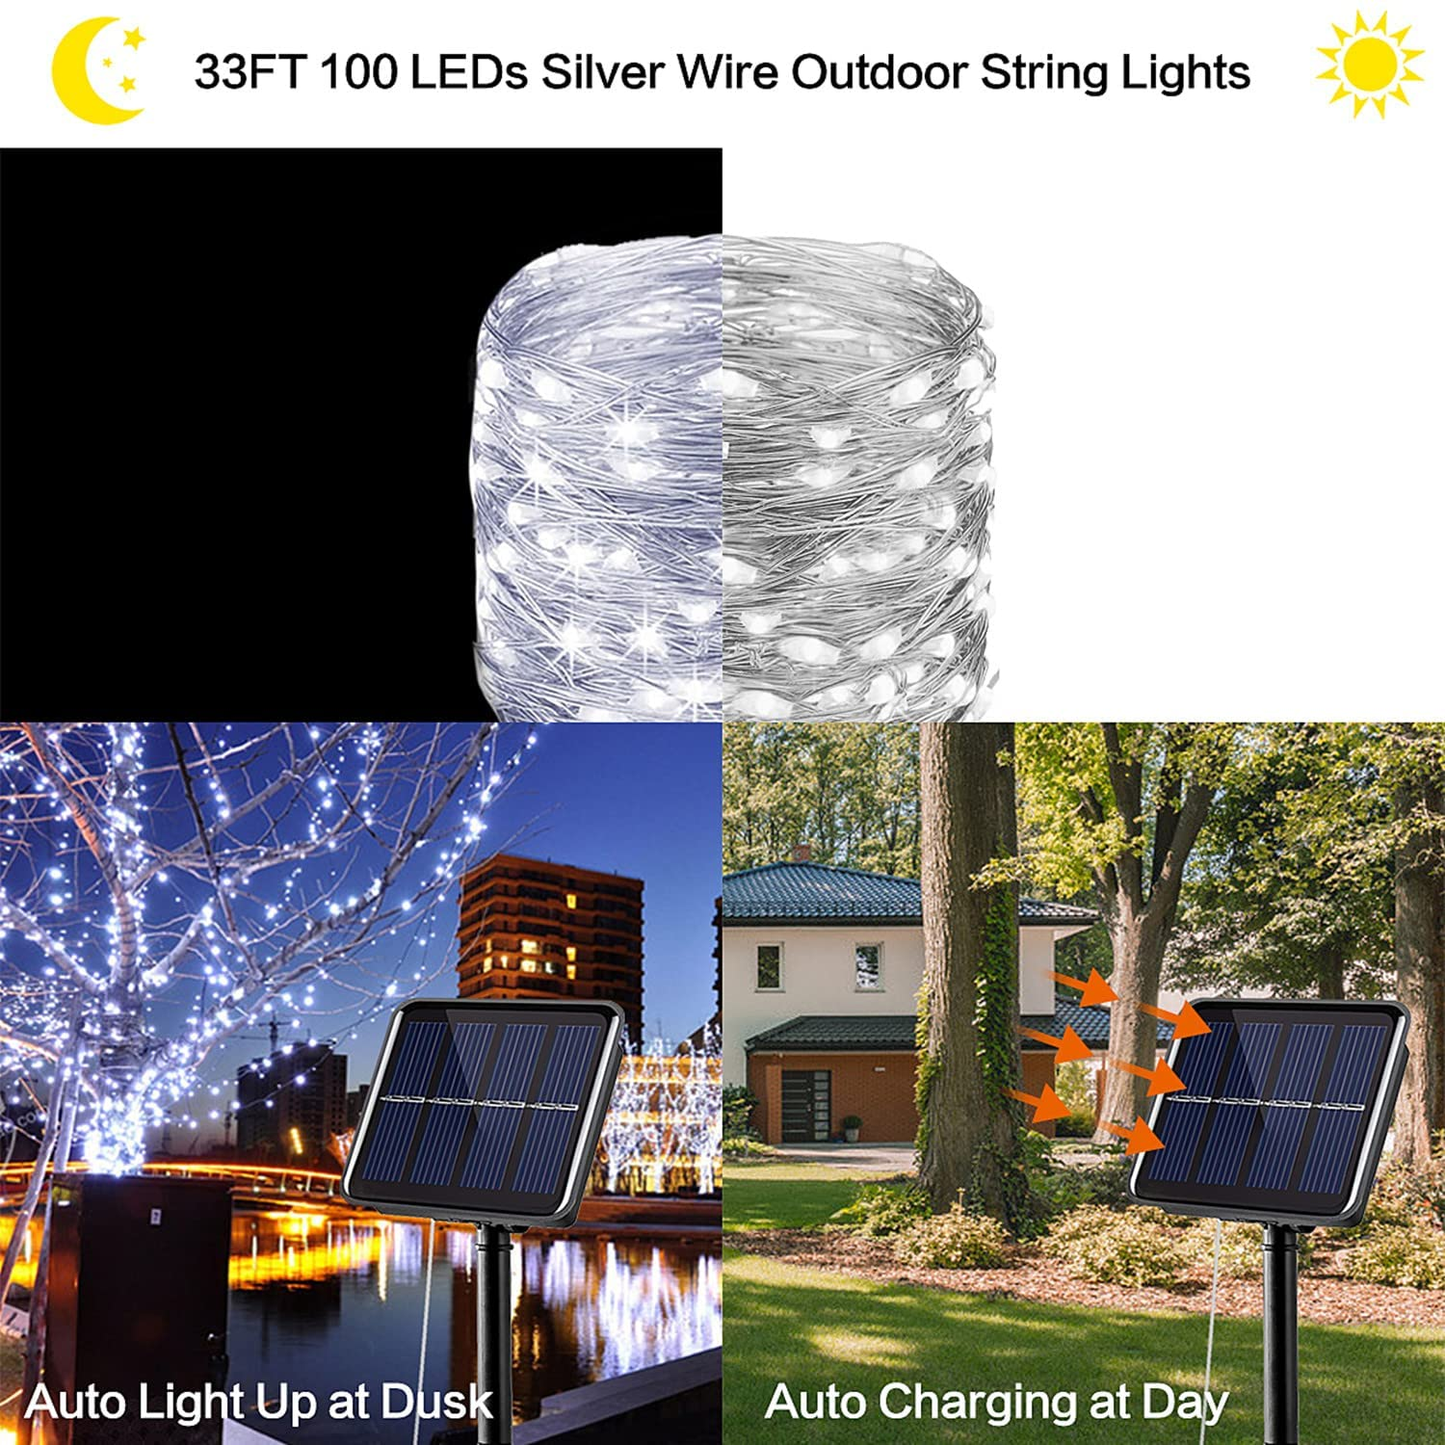 Solar String Lights, Juhefa 2-Pack 33FT 100 Leds Silver Wire Decorative Fairy Lights, Waterproof Outdoor Garden Lights with 8 Modes for Patio Yard Tree Wall Decor (White)